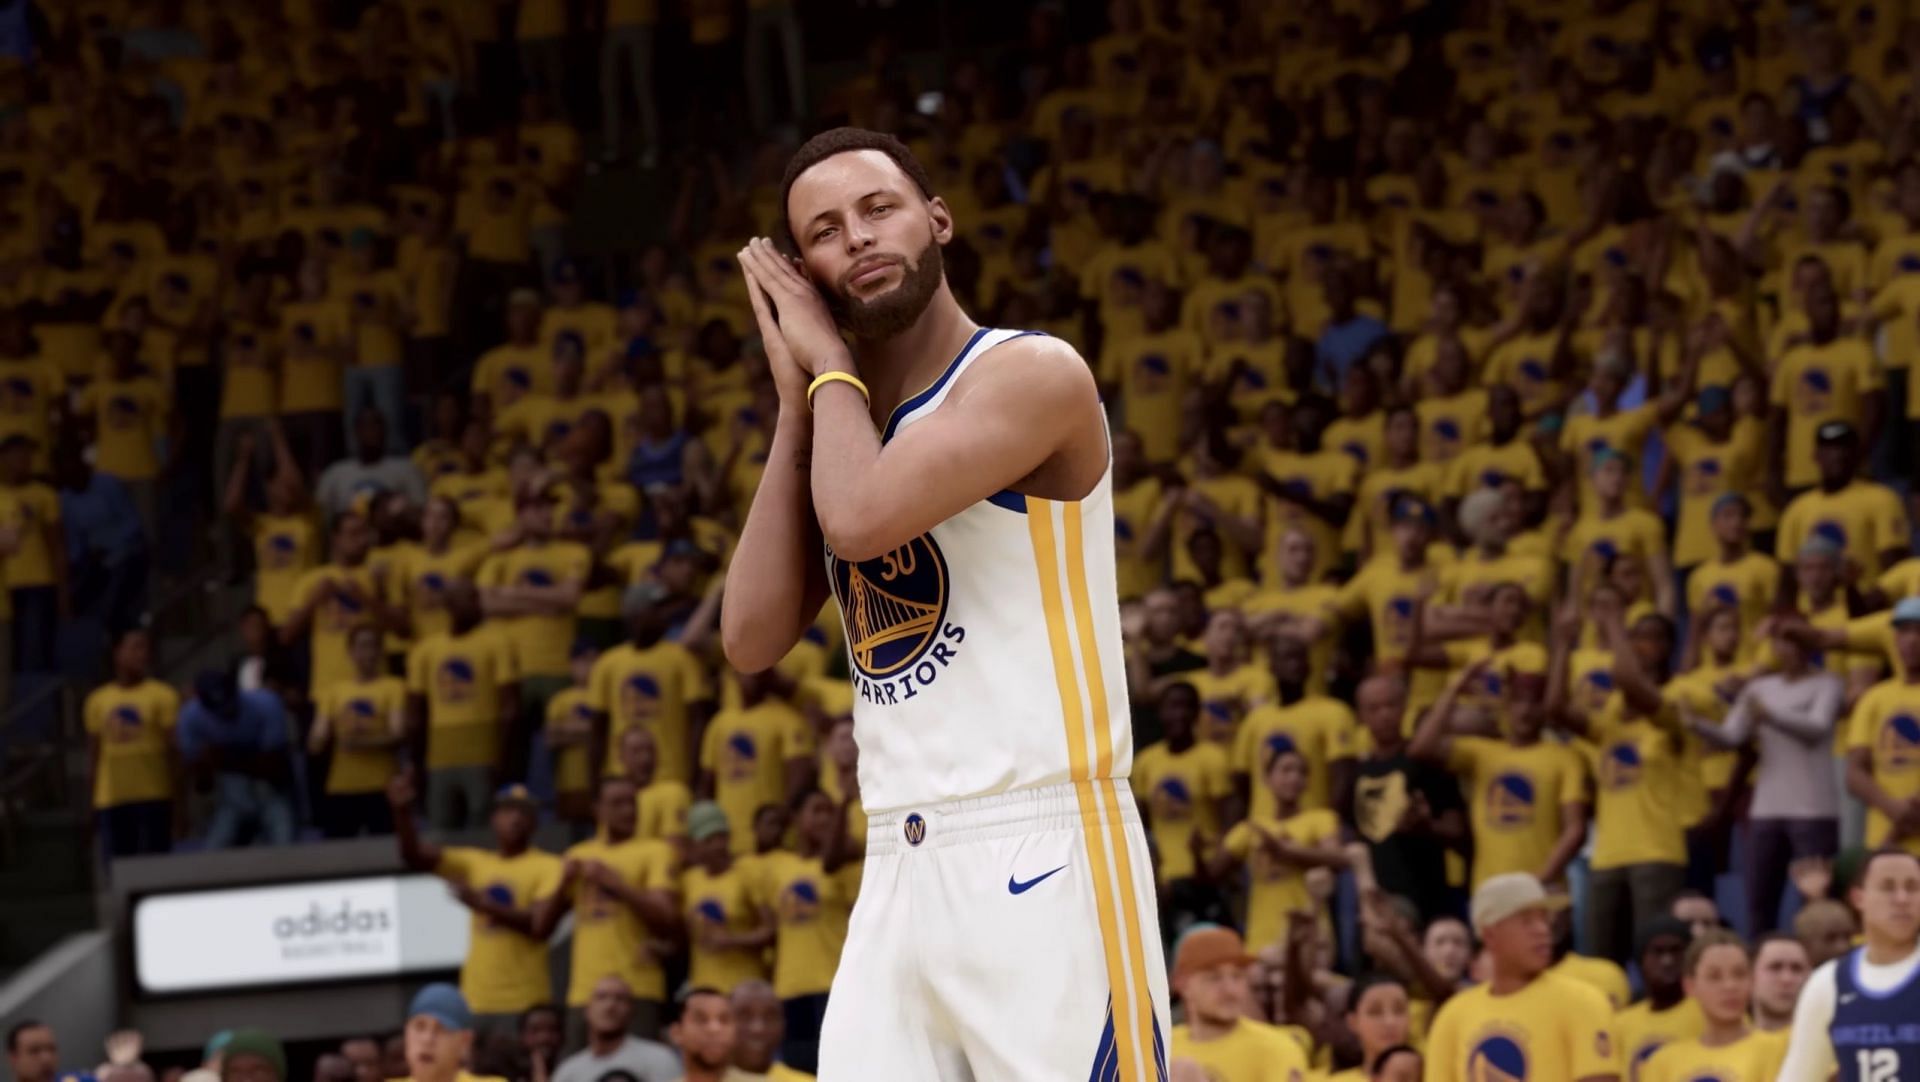 Stephen Curry NBA 2K24 Rating (Current Golden State Warriors)